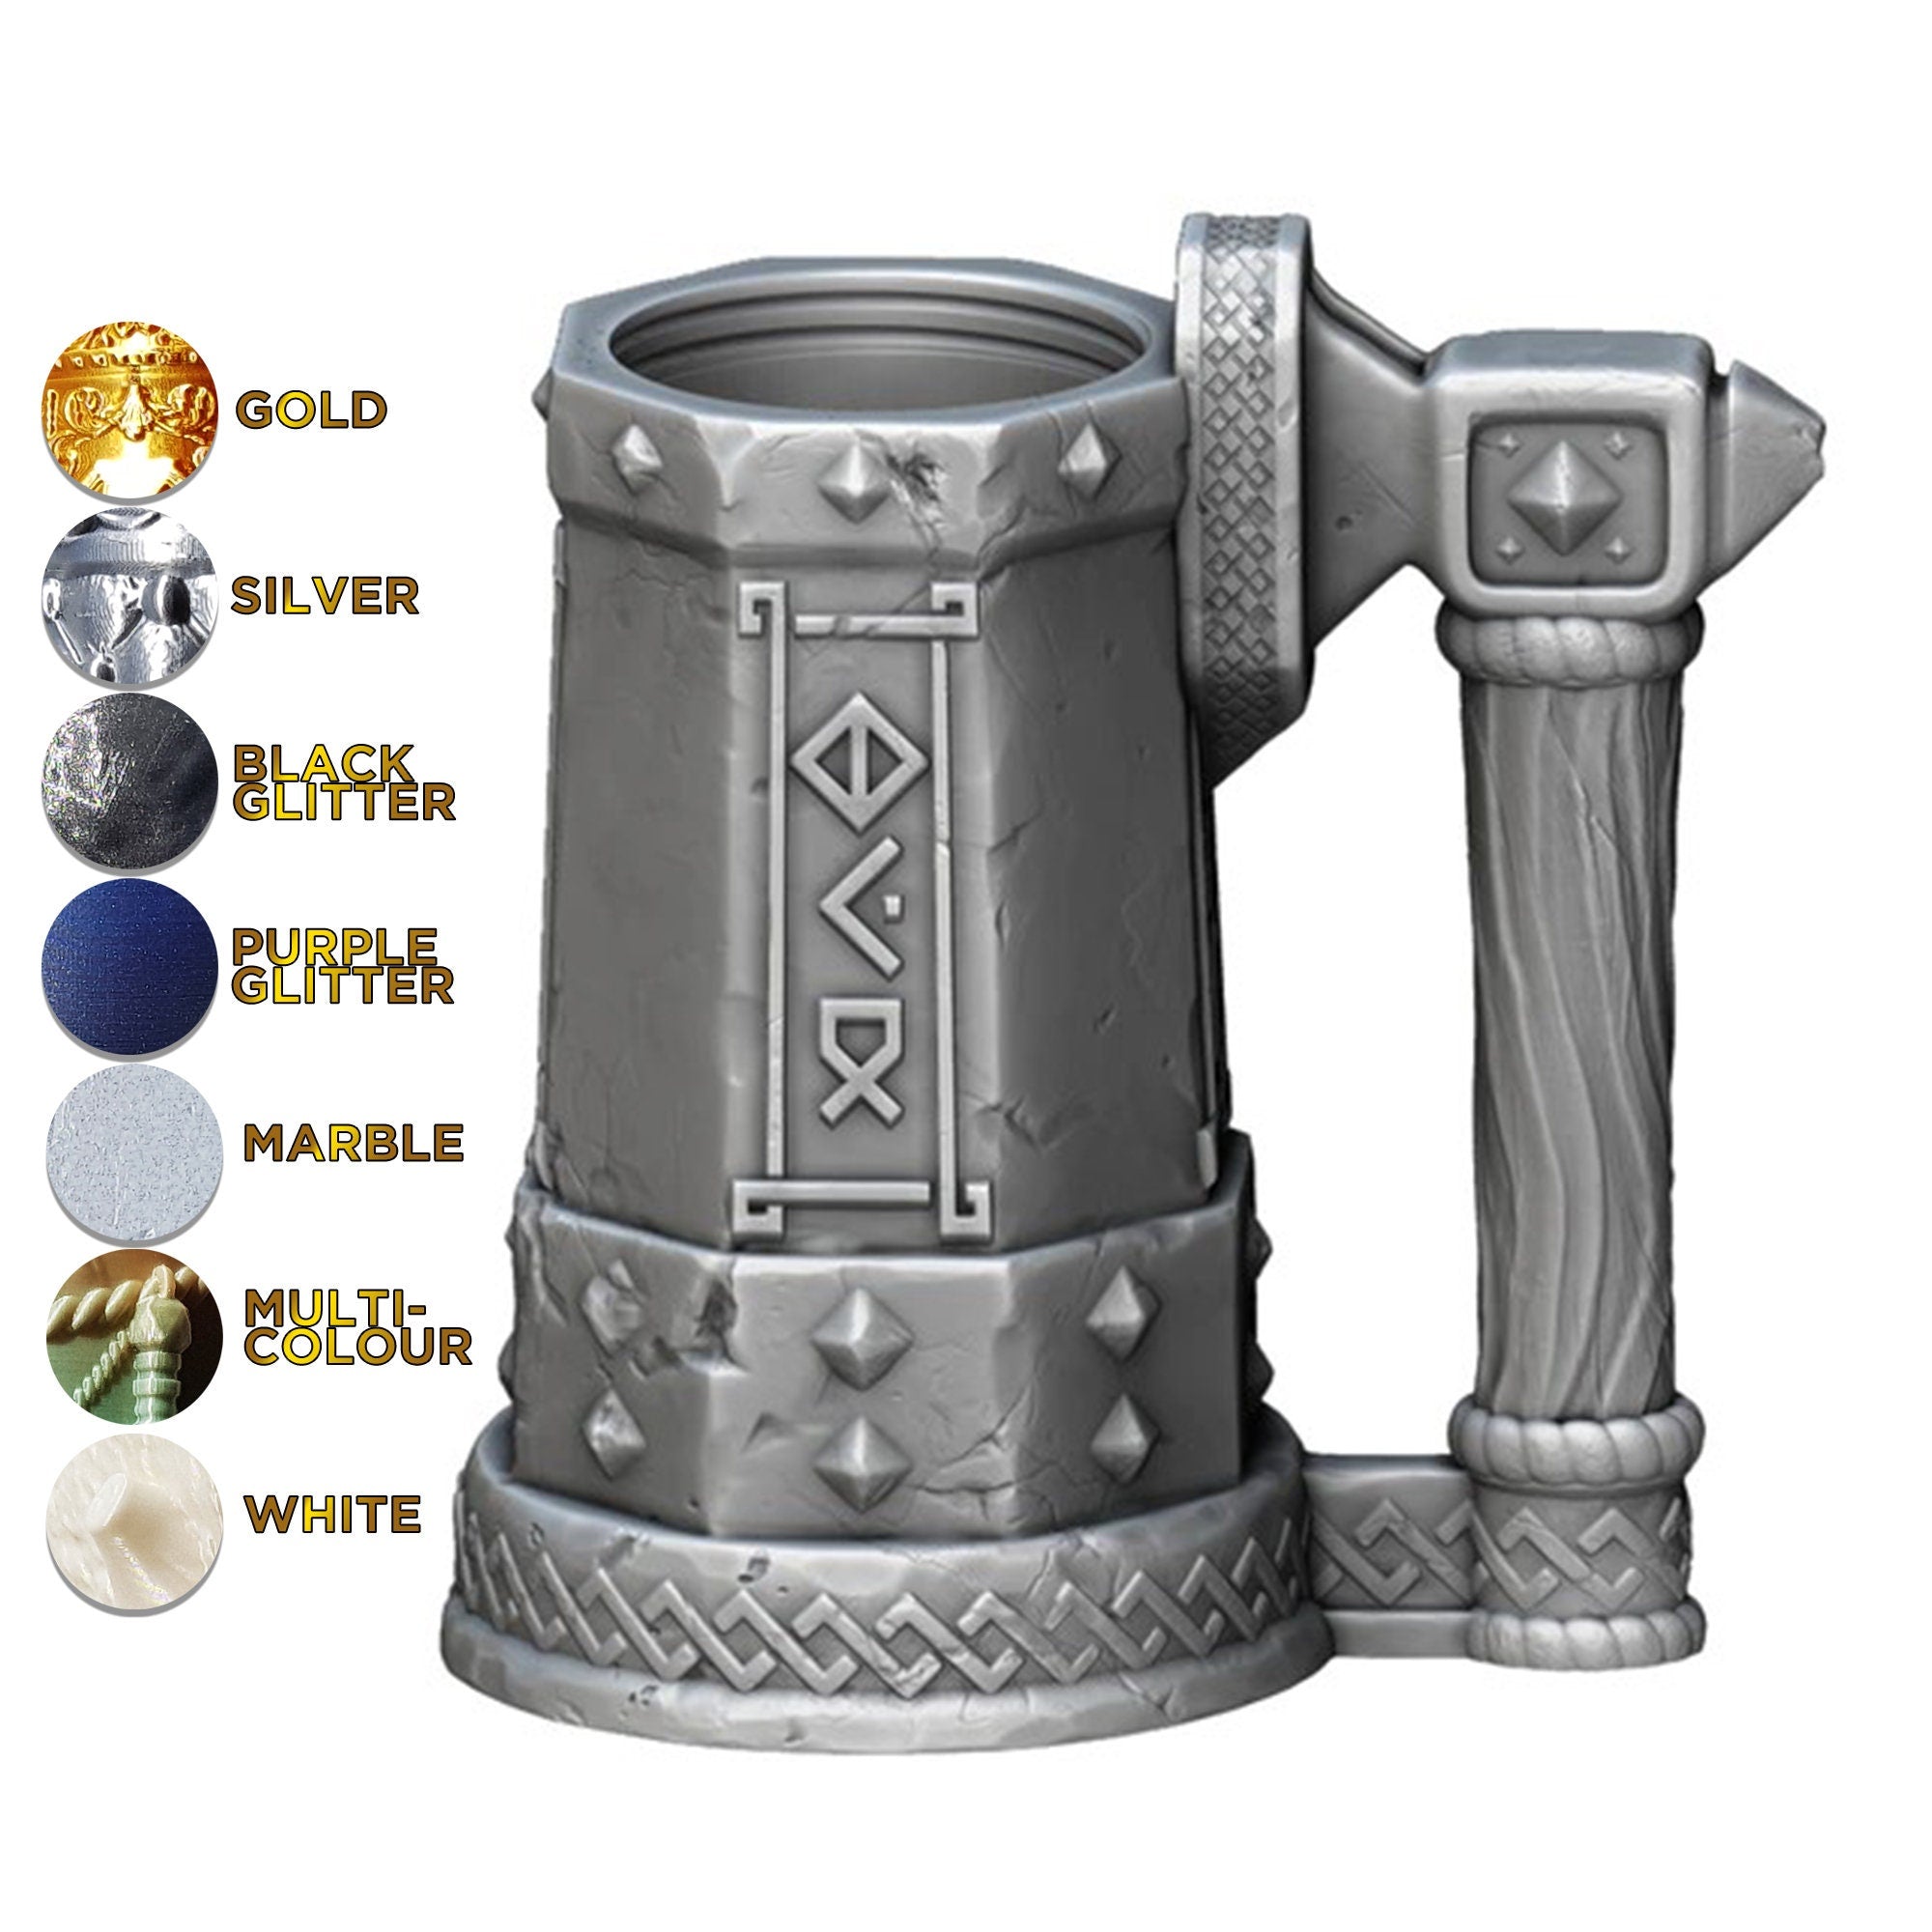 The DWARF | Mythic Mug | Larp | Gaming Zubehör | Tabletop | Dice Cup | Box | Holder | Dungeons and Dragons | DnD | RPG | Fantasy-Role Playing Games